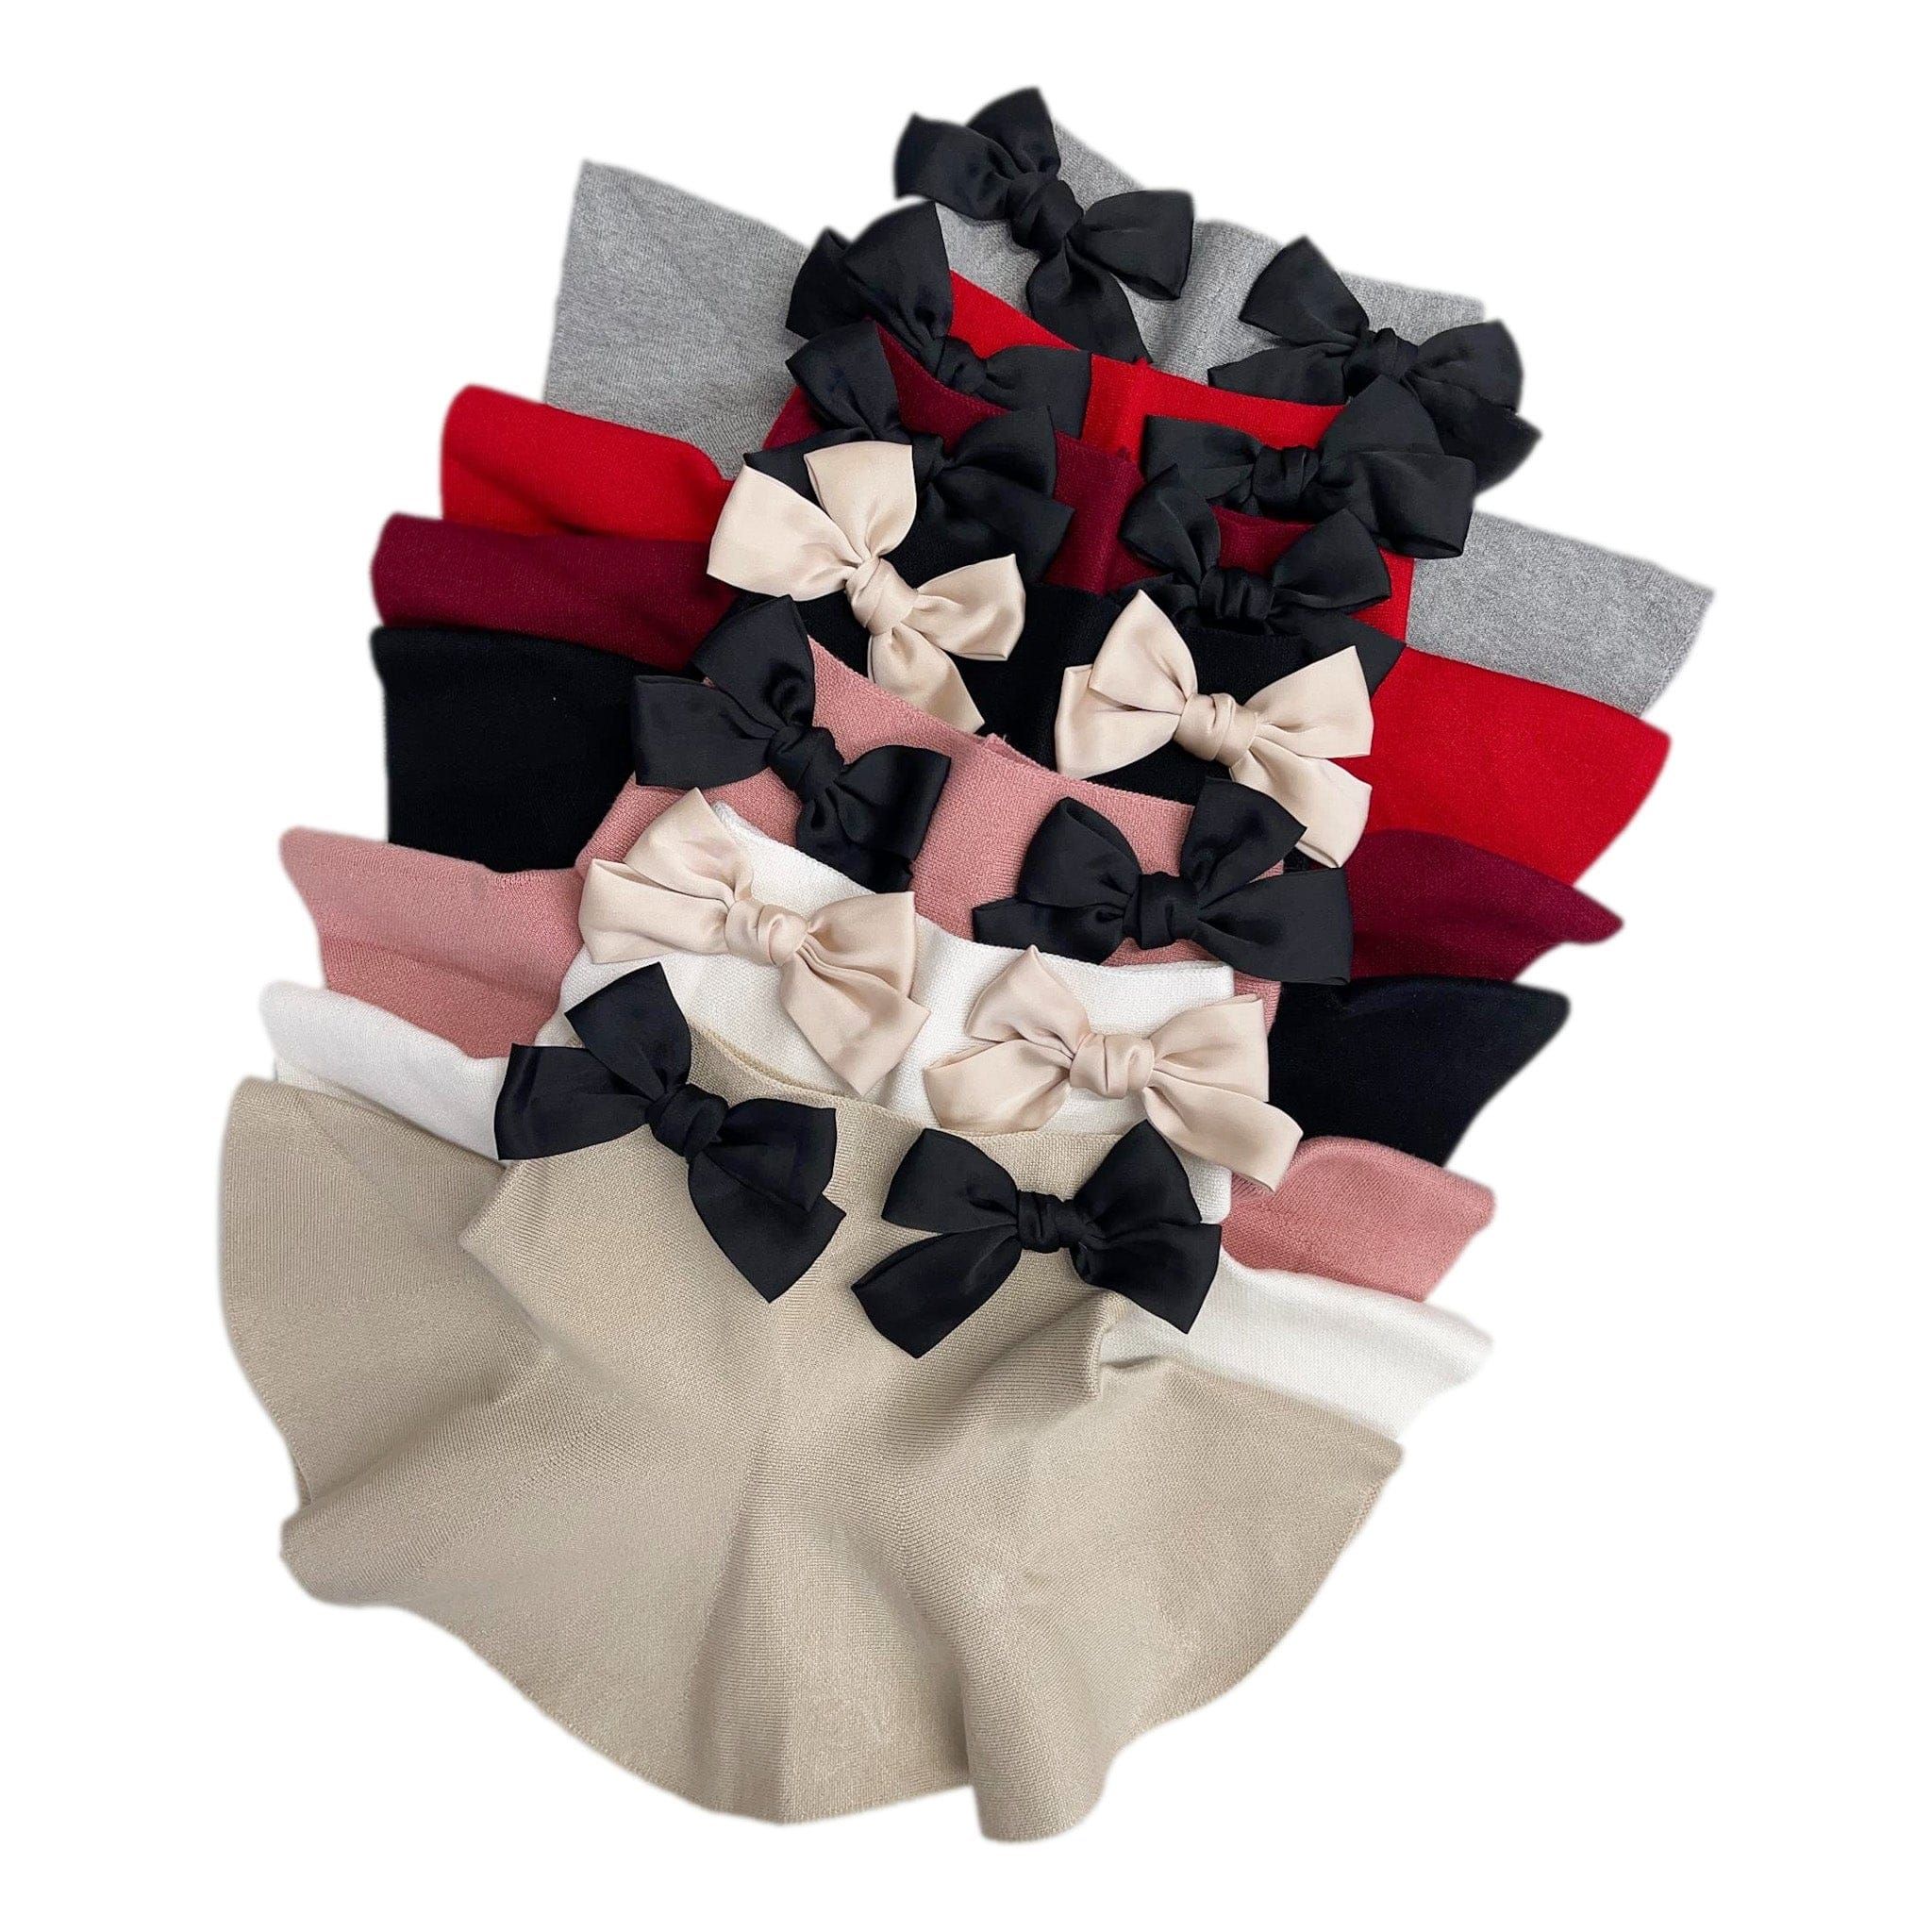 Flare skirt With Satin Bow | petite maison kids